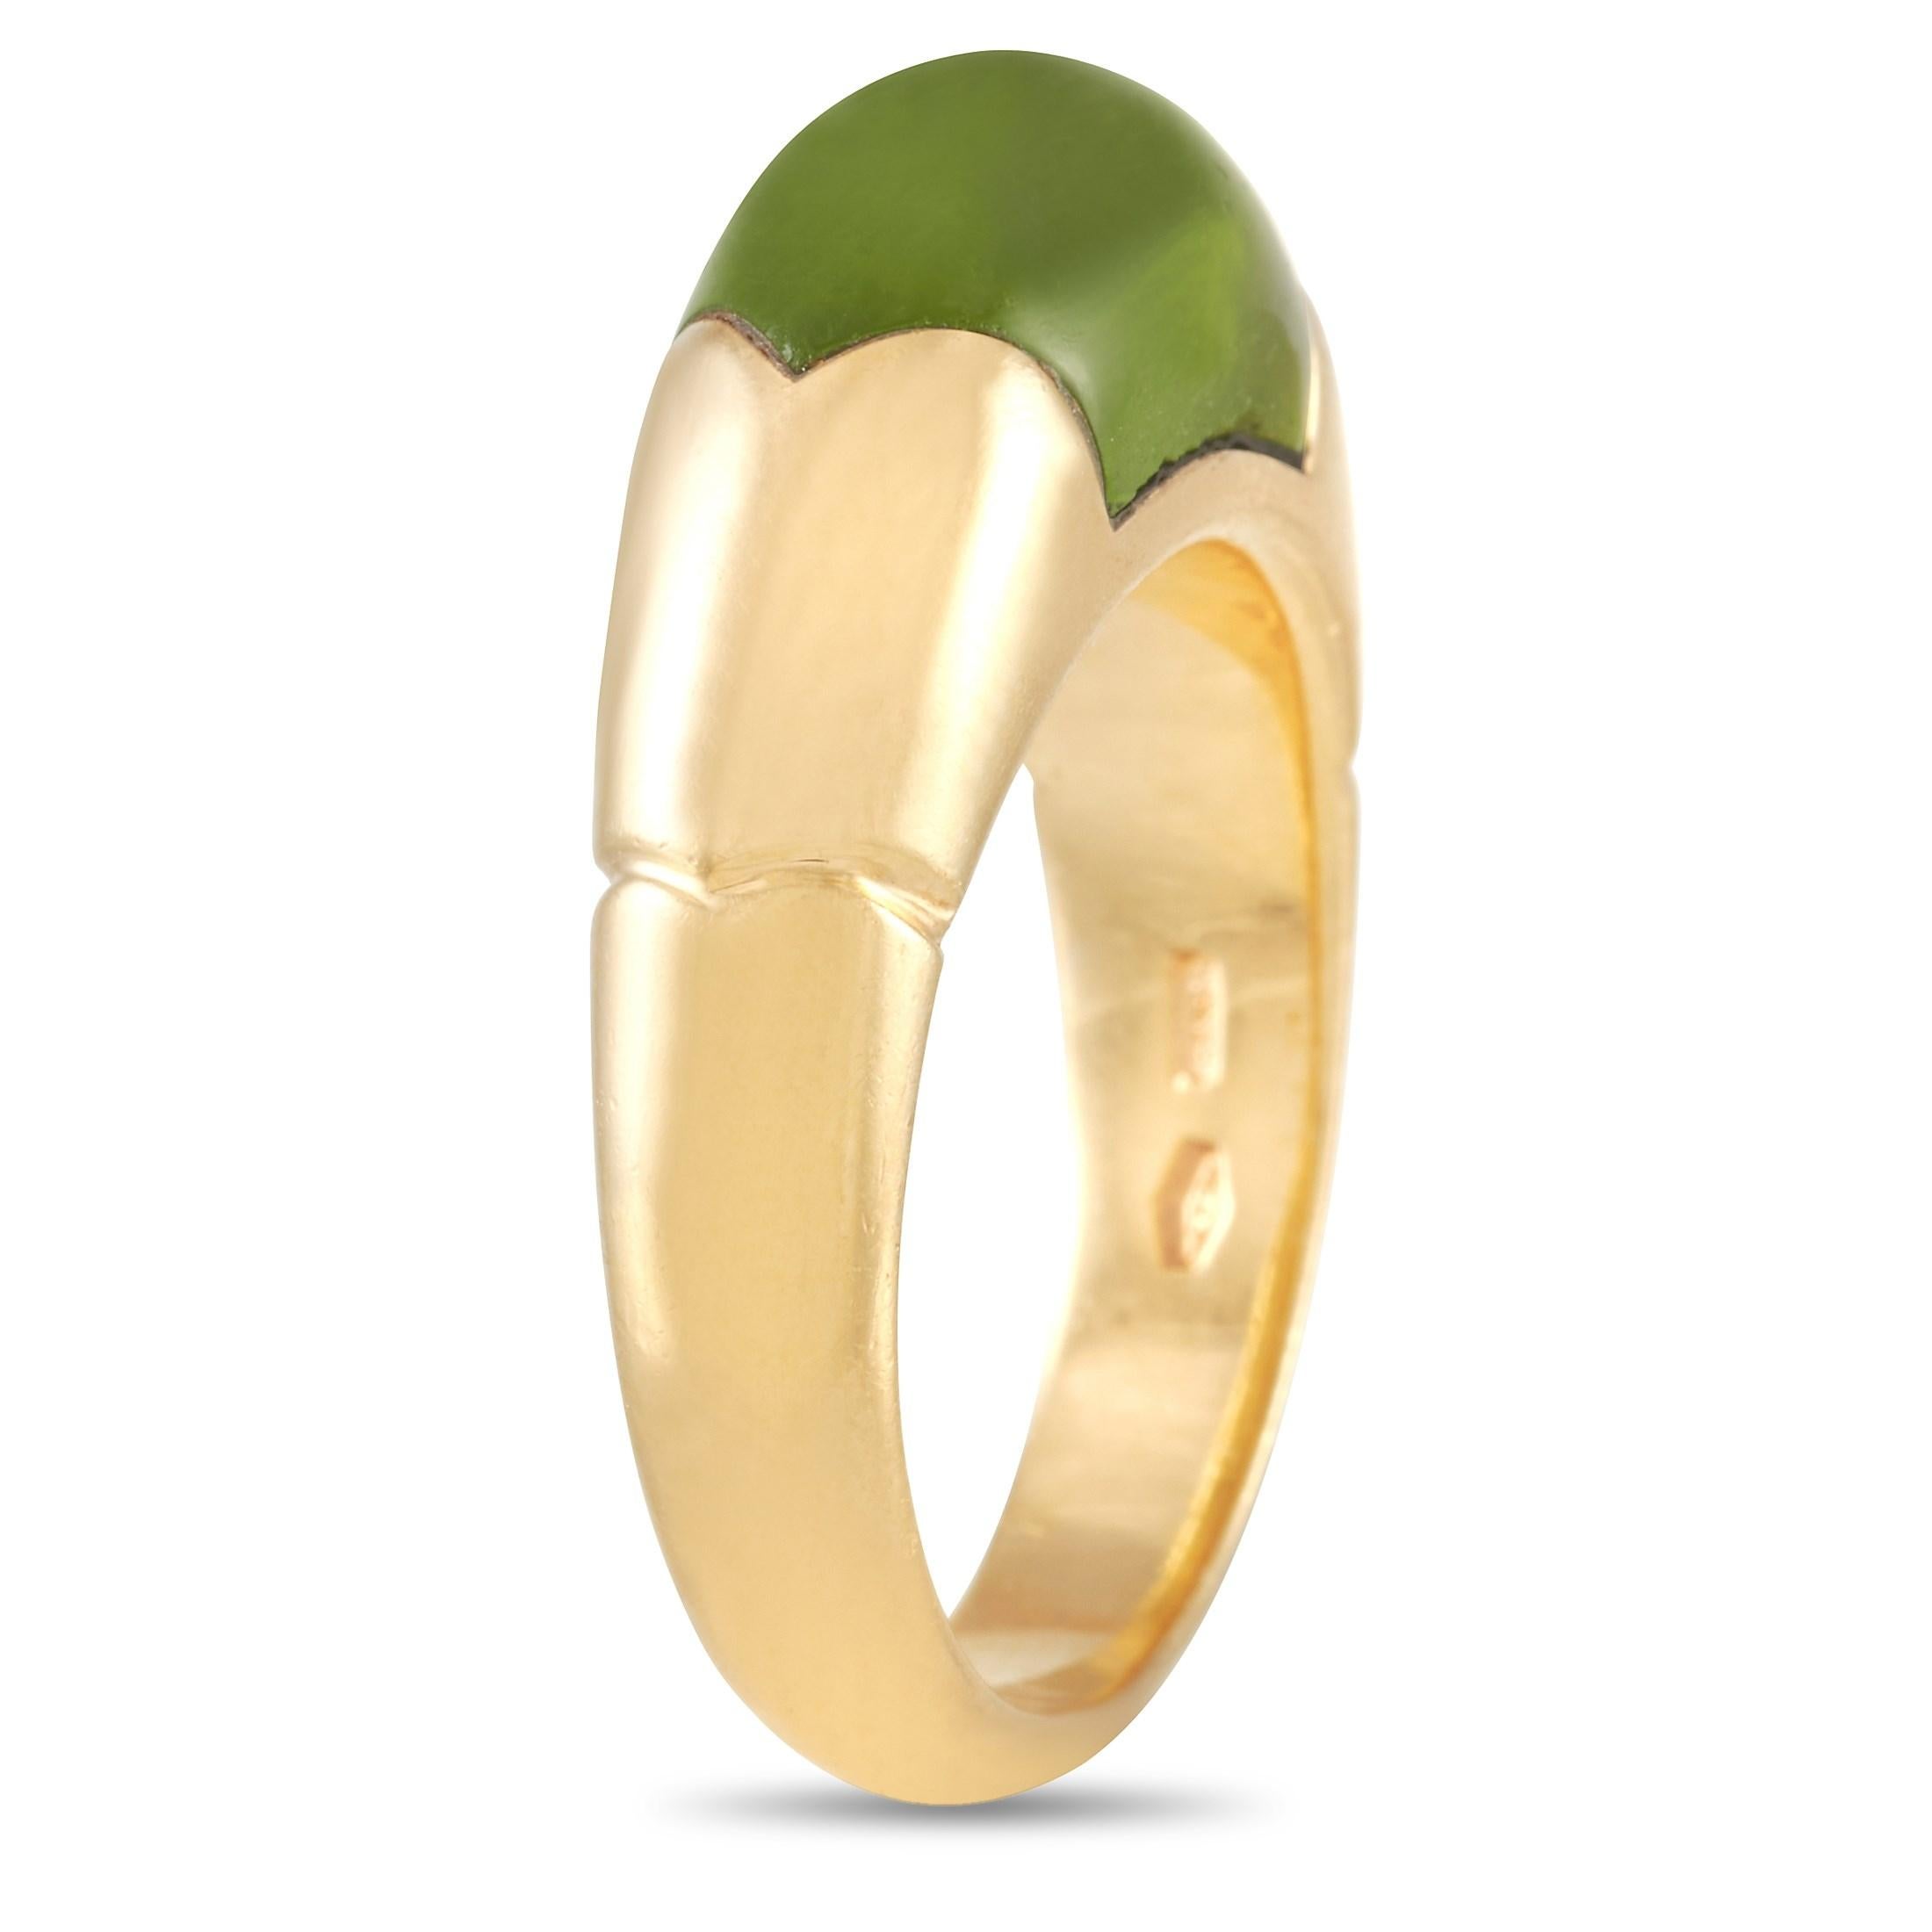 This lovely Bvlgari Tronchetto 18K Yellow Gold Peridot Ring is made with 18K yellow gold and is set with a large peridot stone at the front of the band. The ring has a band thickness of 5 mm, a top height of 7 mm, and top dimensions of 7 by 18 mm,